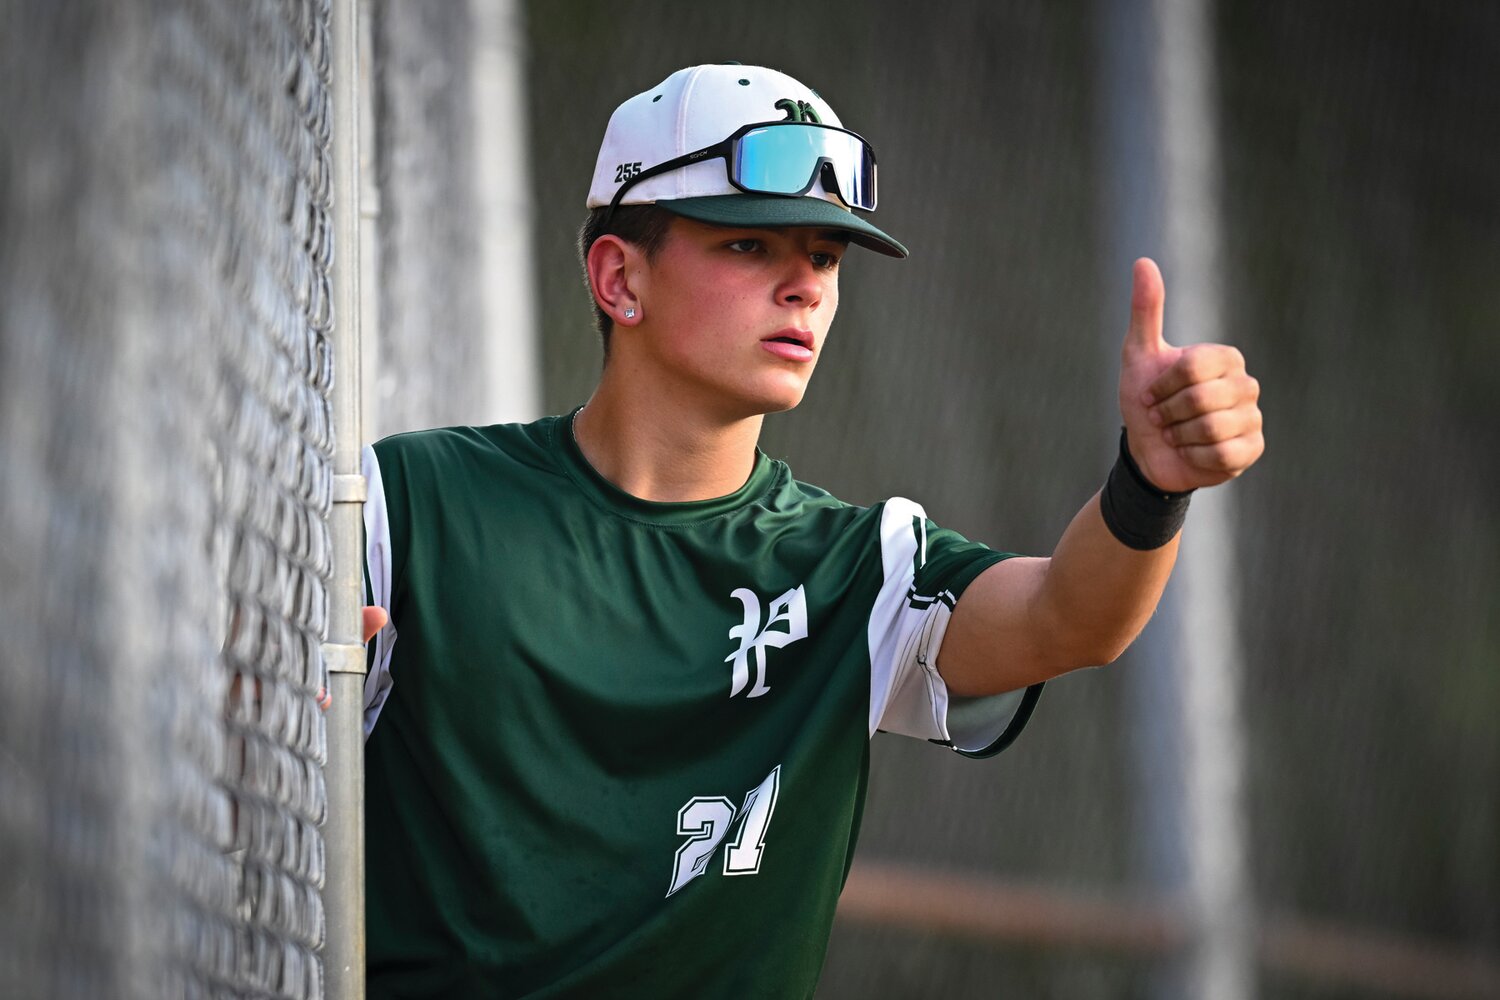 It was all thumbs up from Pennridge’s Antonio Lillo during the big six-run third inning.